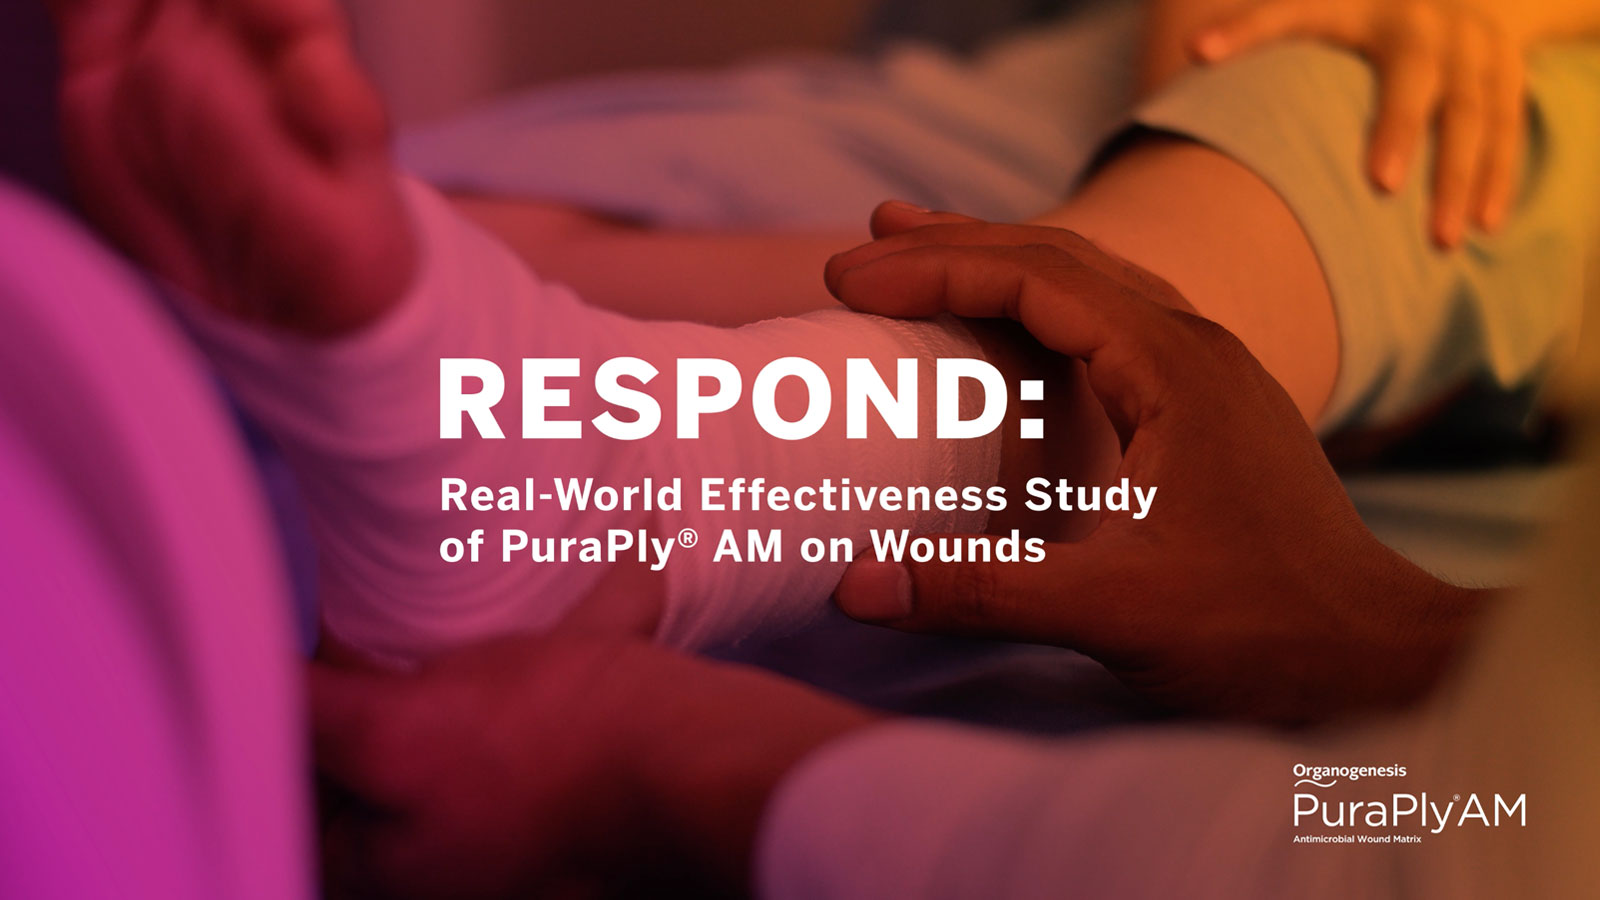 The opening frame from the RESPOND: Real-World Effectiveness Study of PuraPly AM on Wounds video